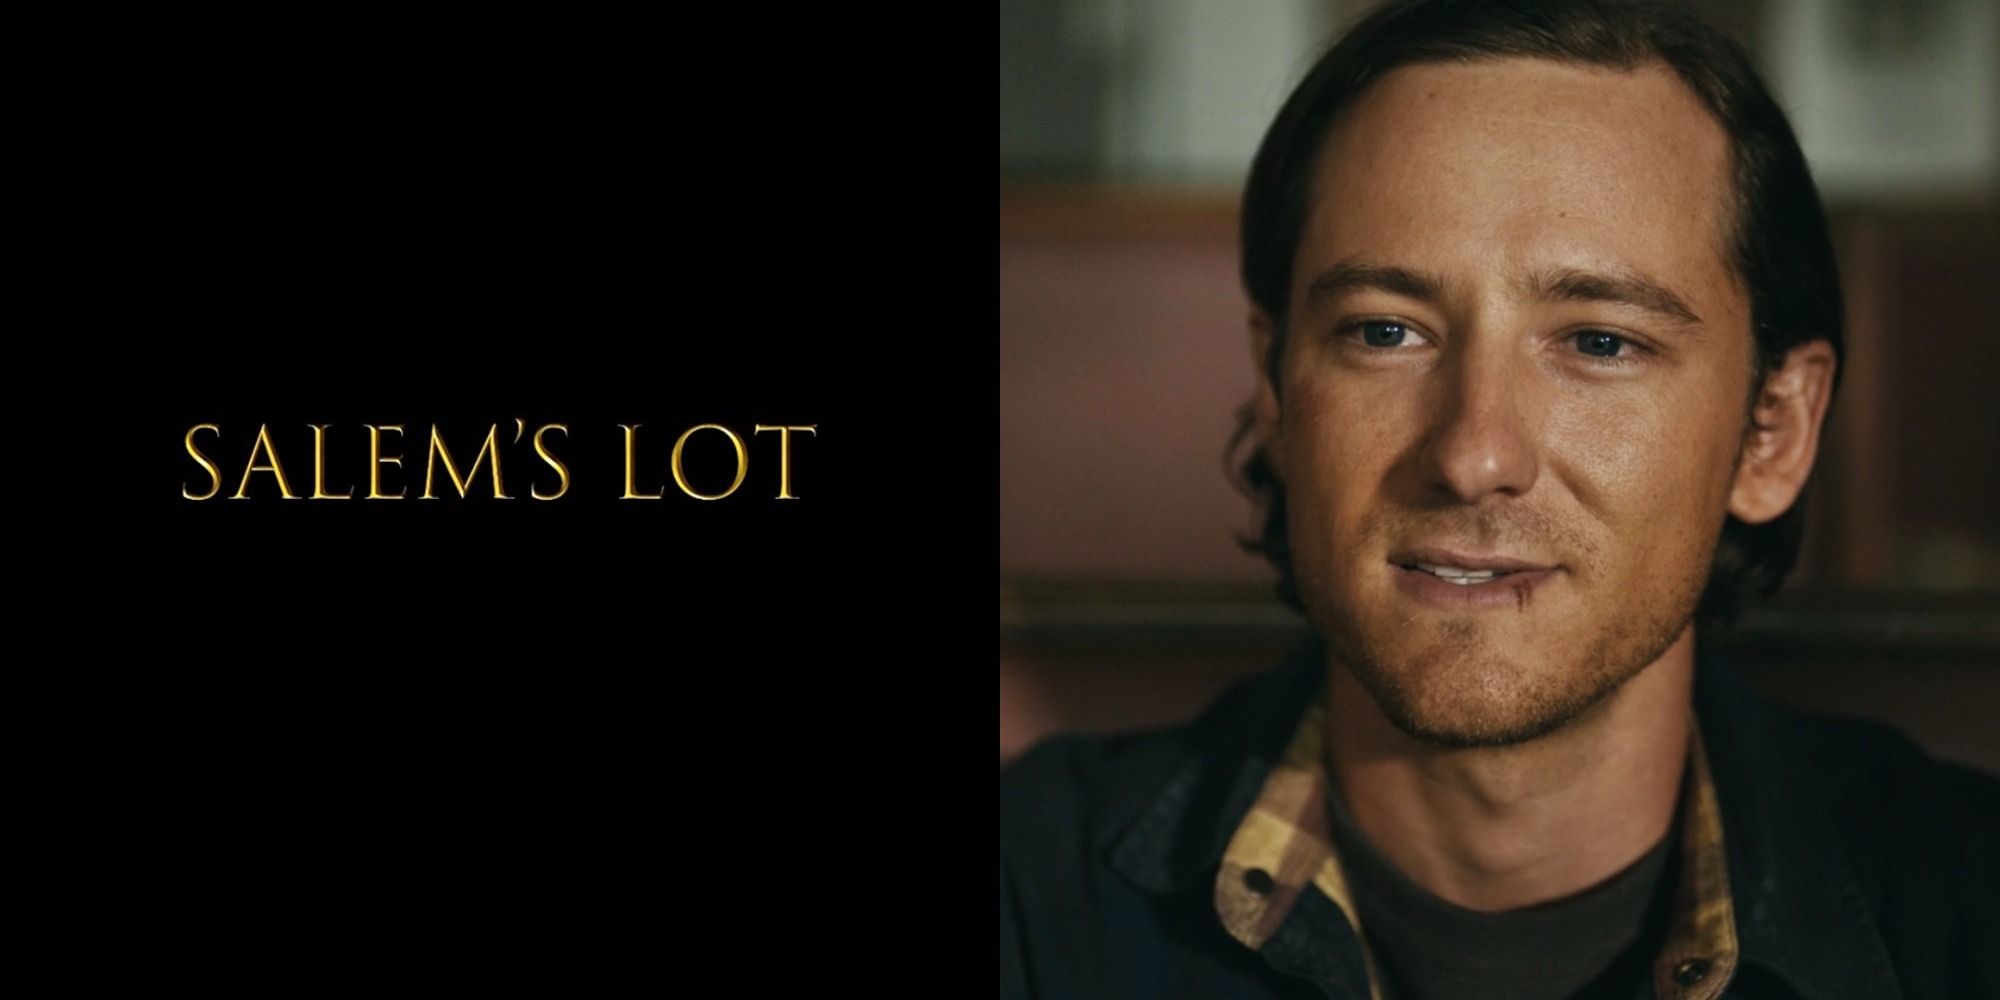 Split image showing the logo for Salem's Lot and actor Lewis Pullman.